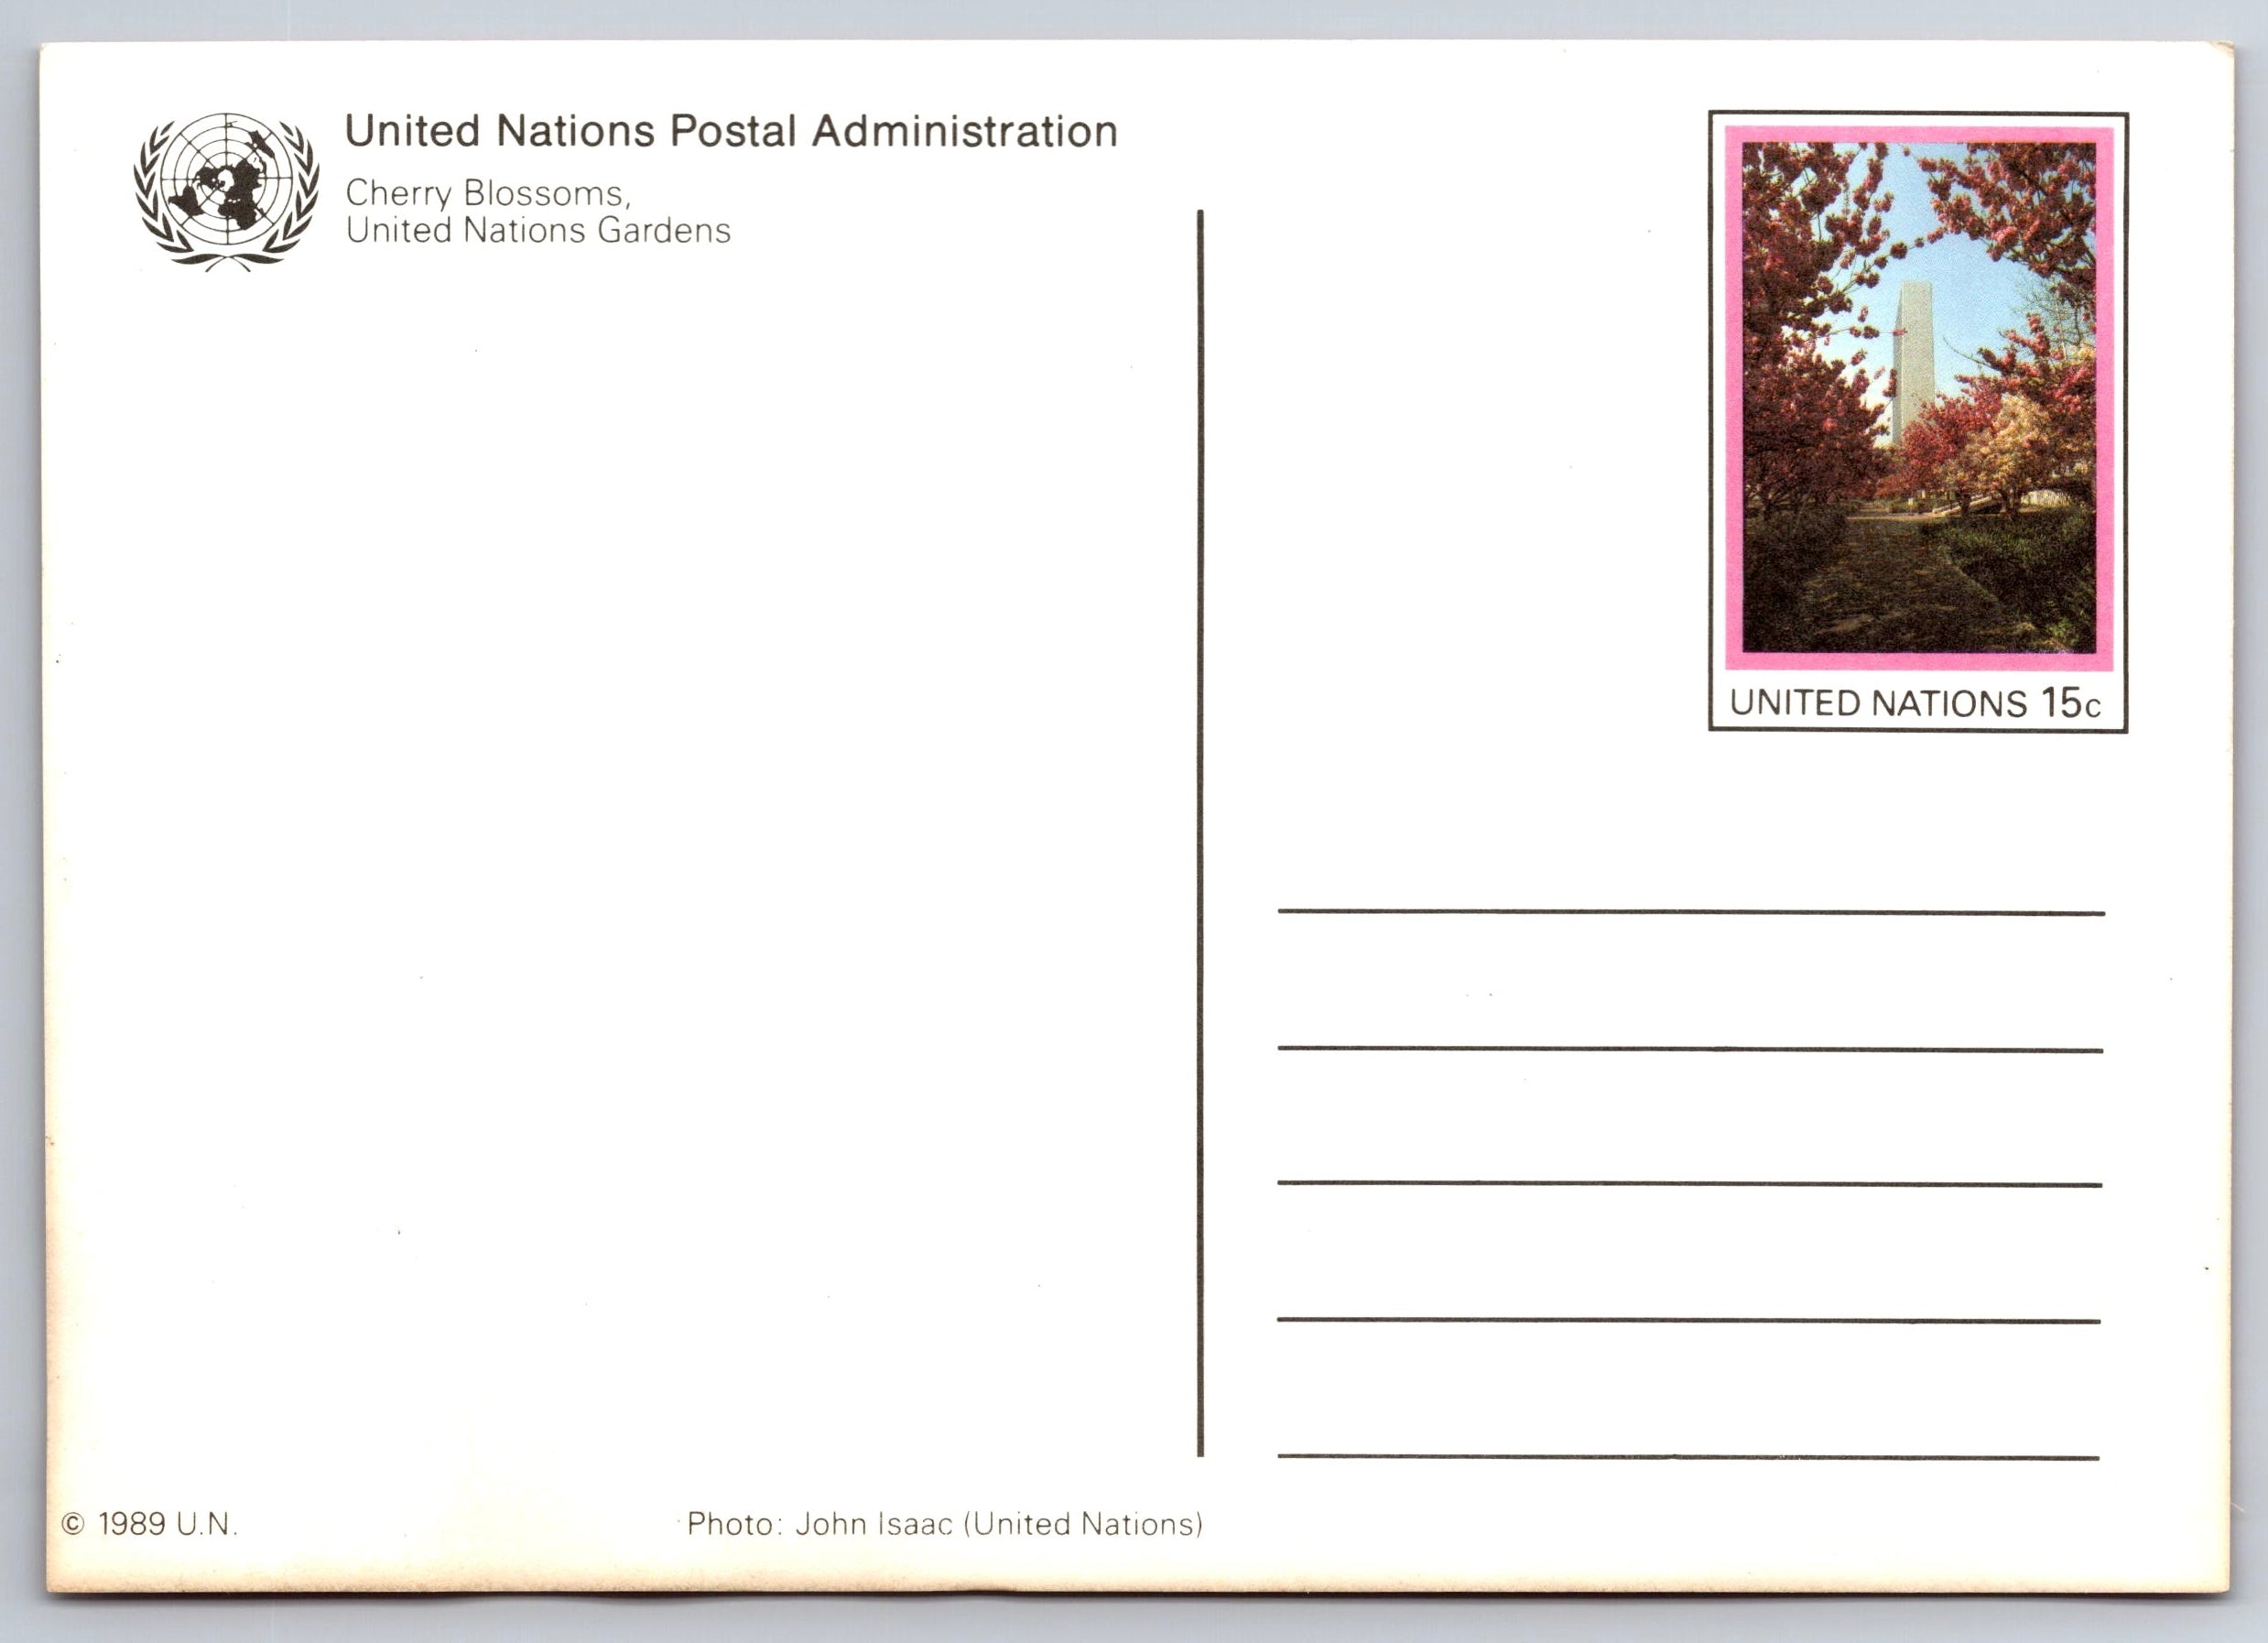 Cherry Blossoms, United Nations Gardens, Vintage Post Card